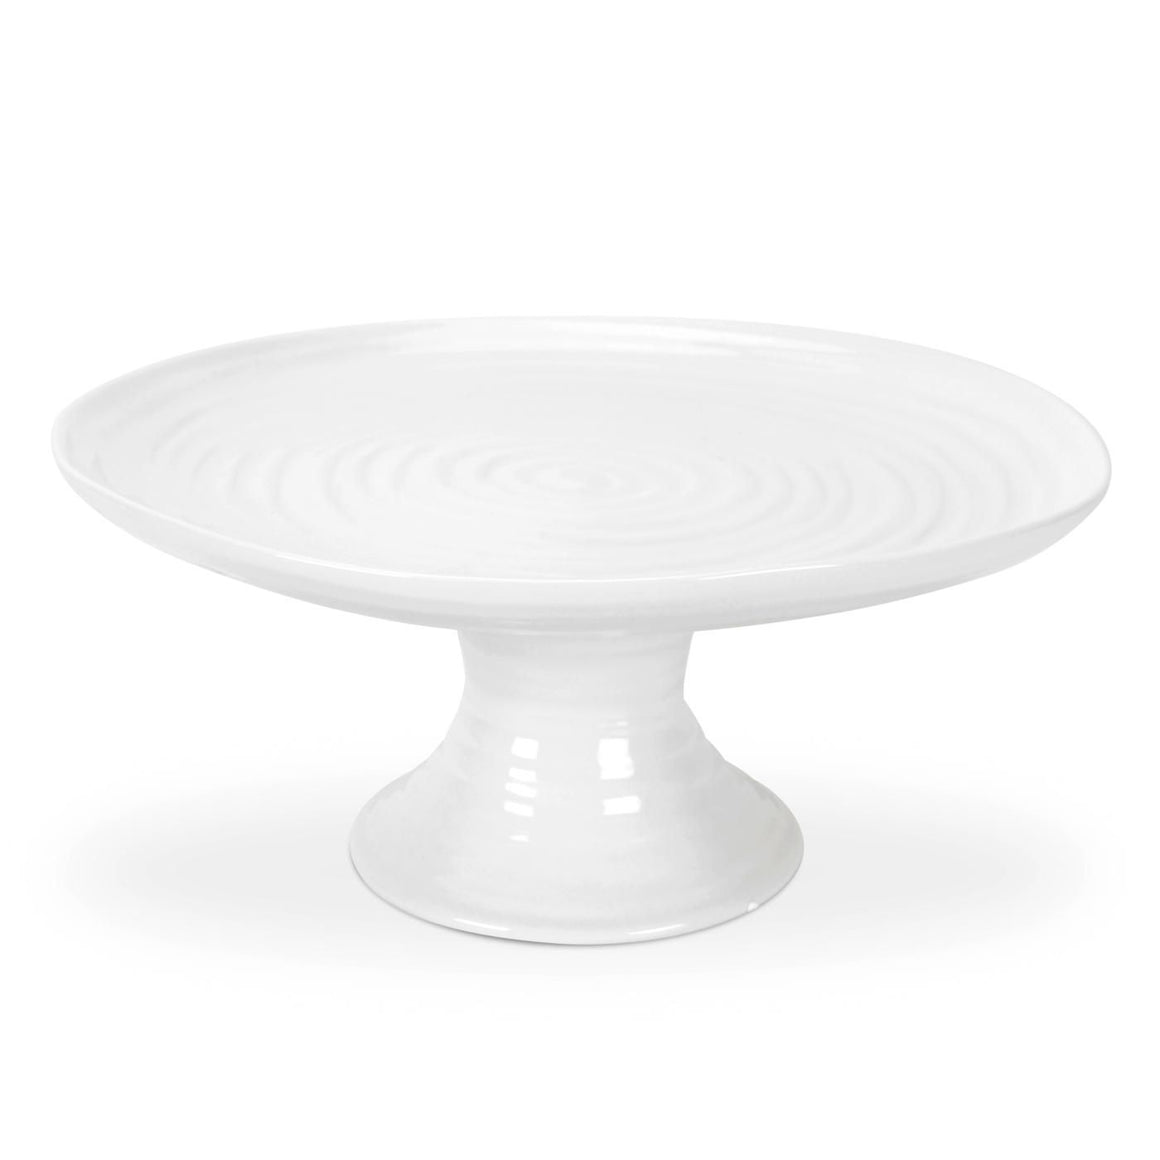 Sophie Conran Small Footed Cake Plate